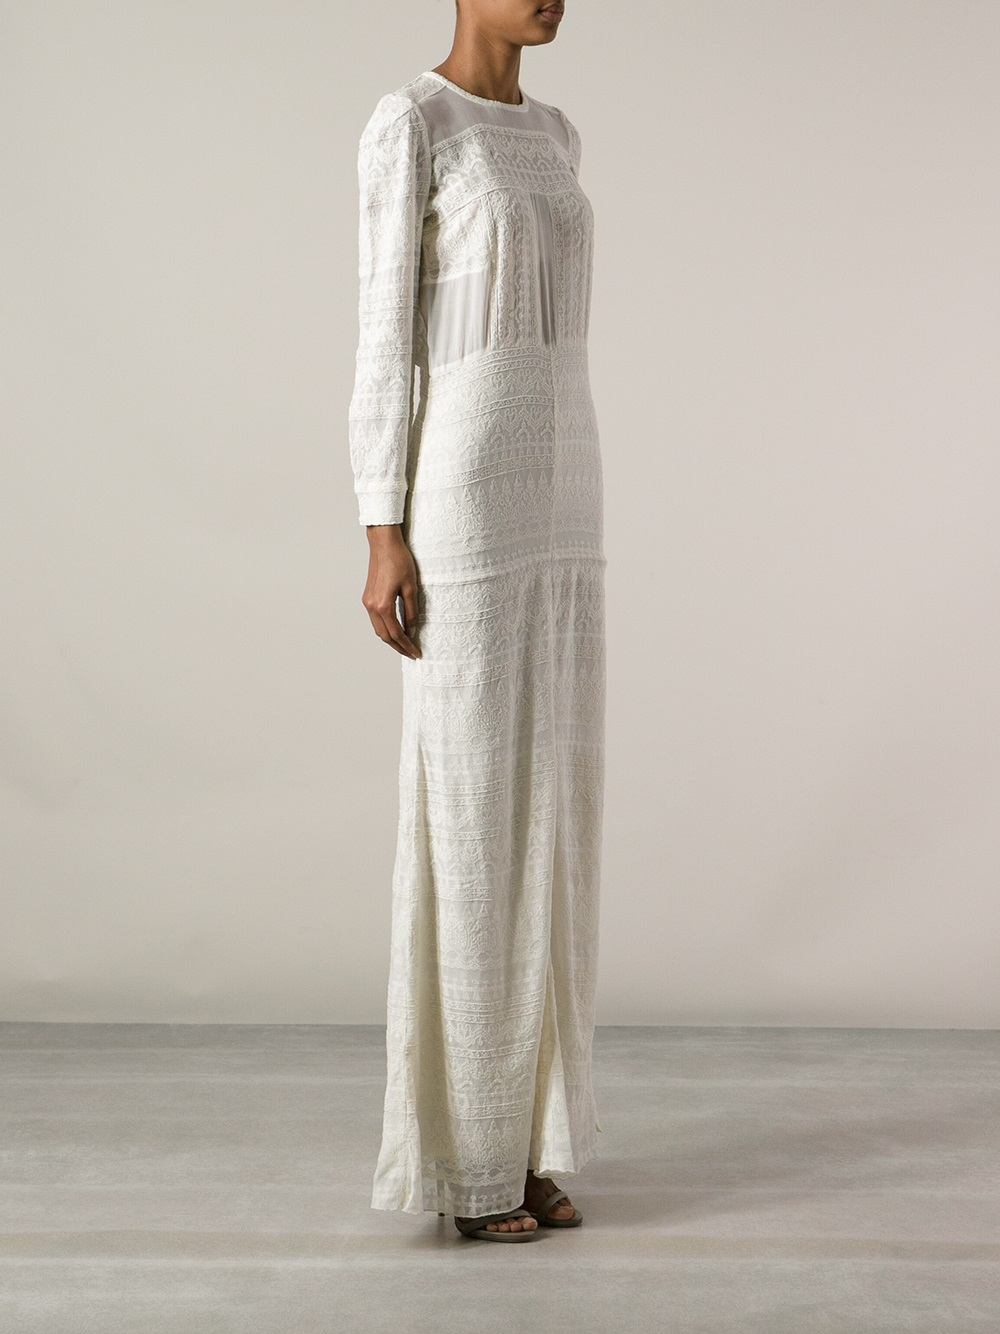 Isabel Marant Lace Maxi Dress in White | Lyst